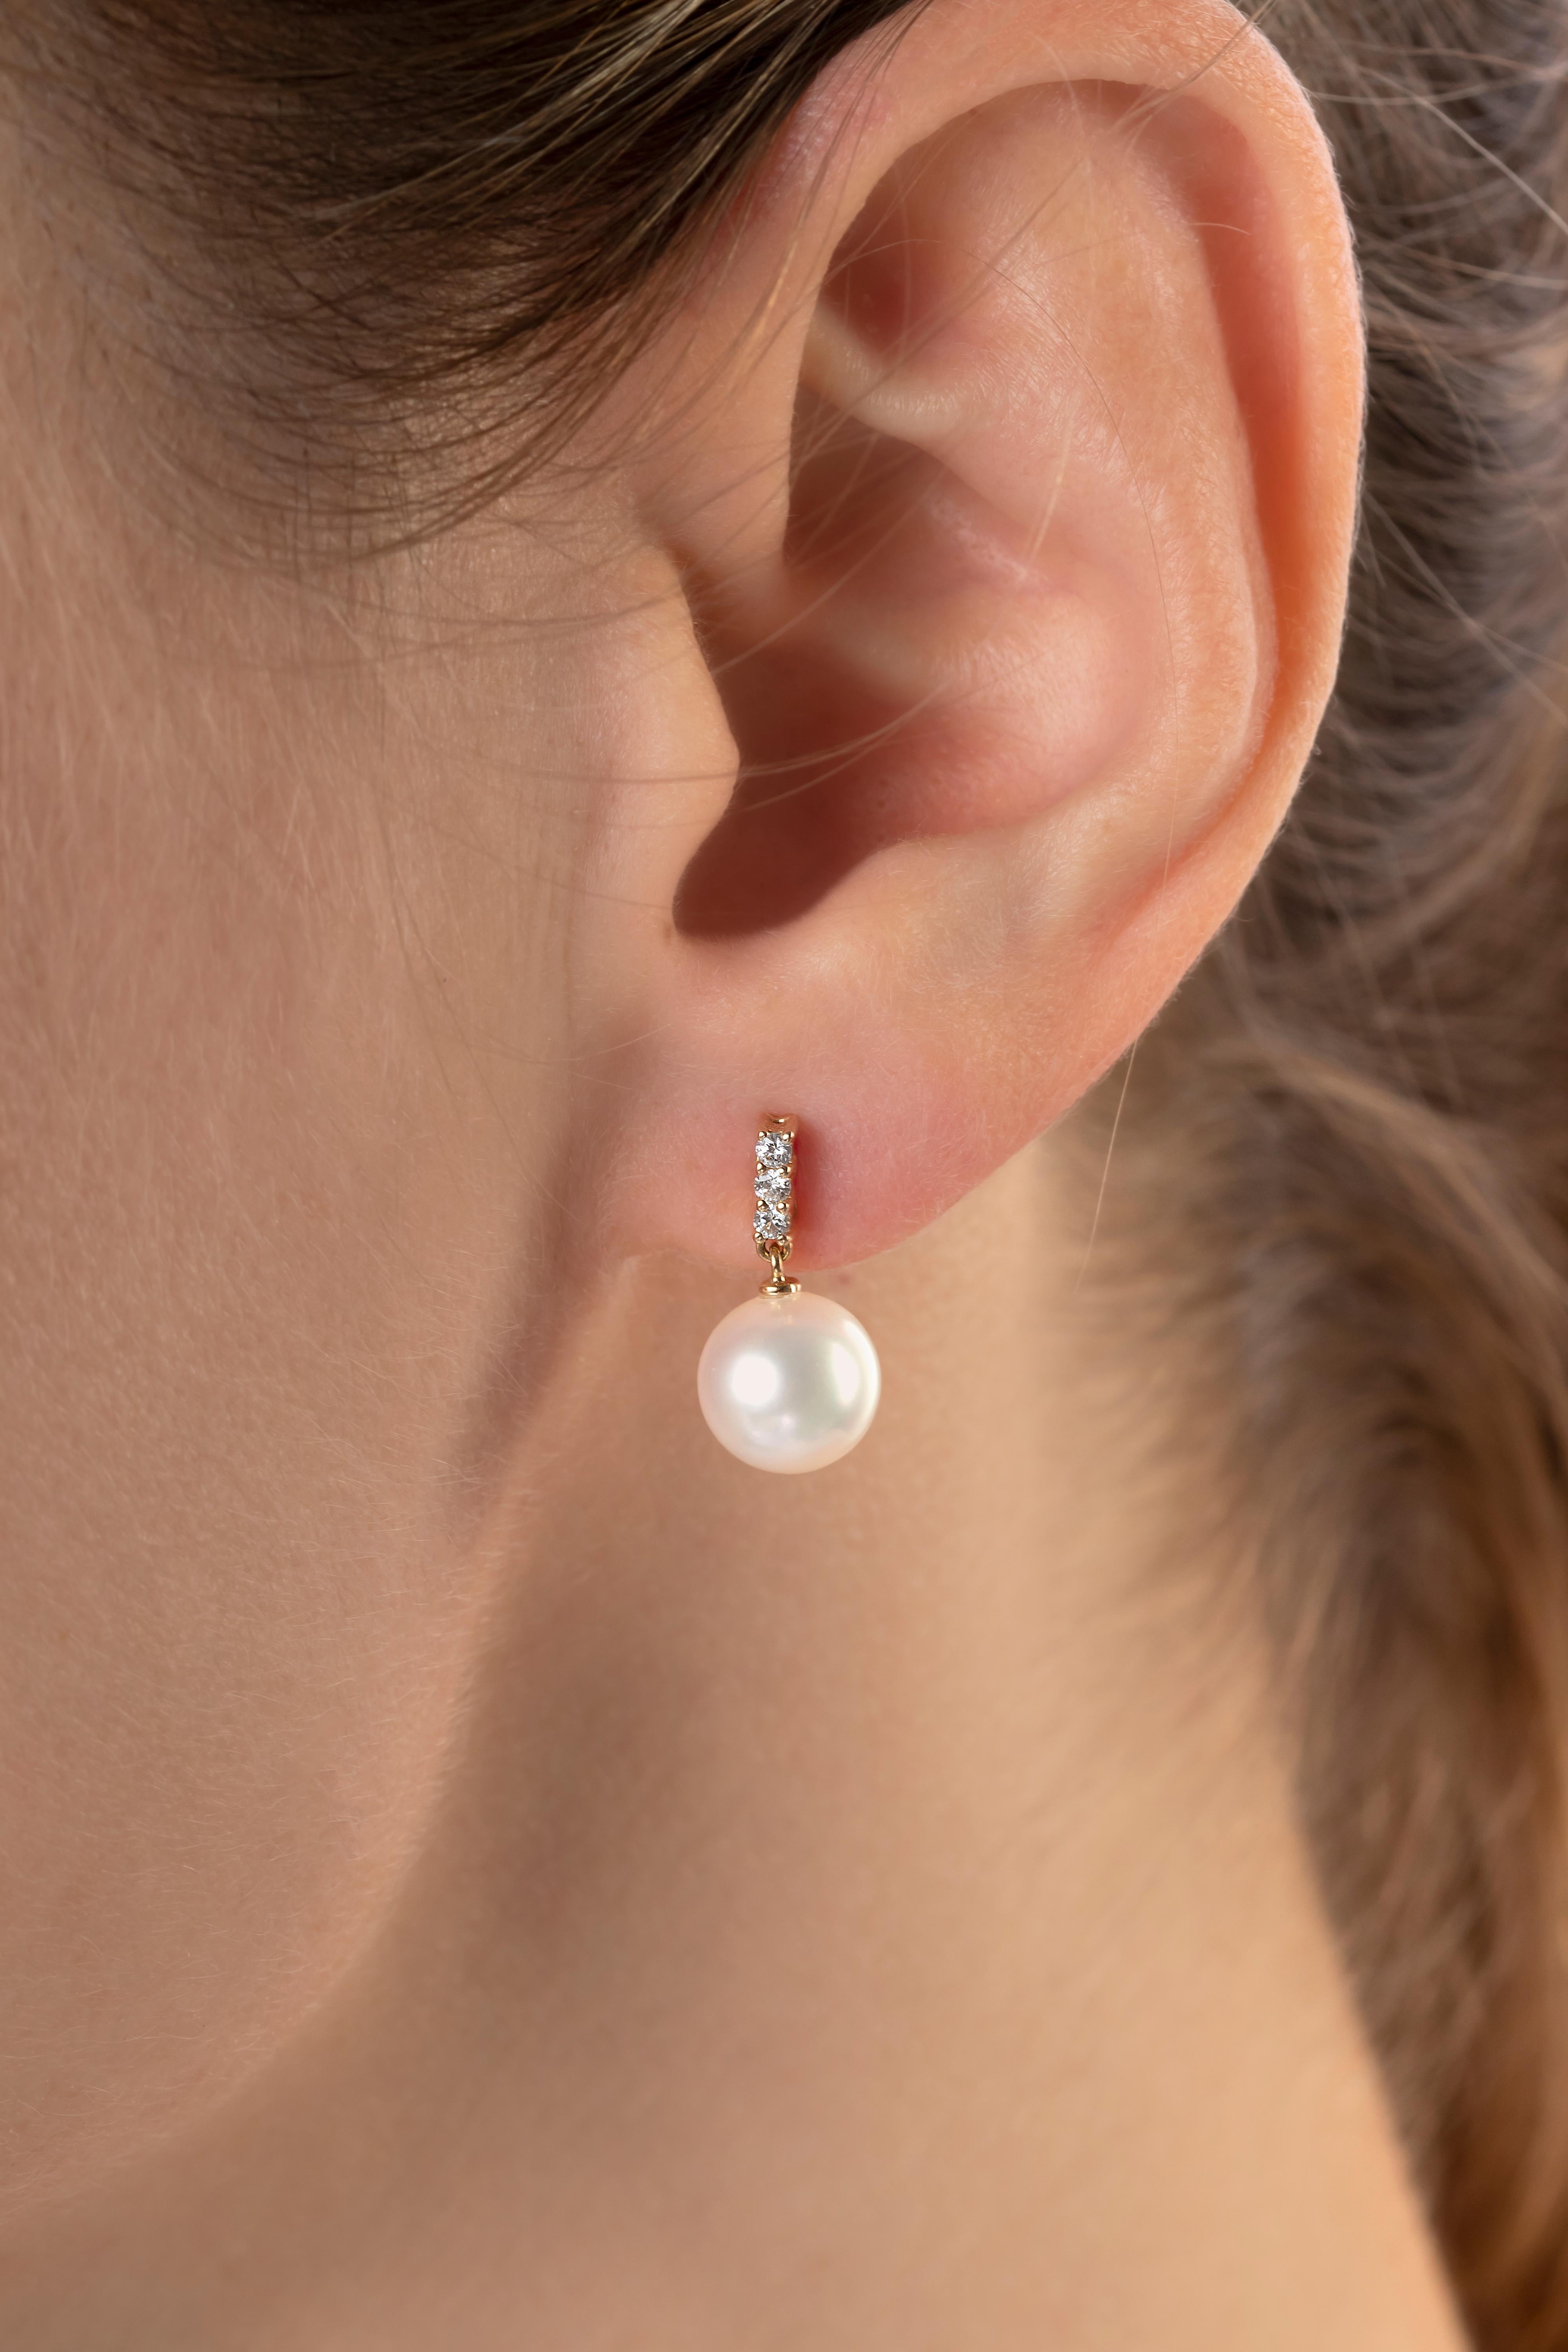 These timeless earrings by Yoko London feature lustrous Akoya pearls beneath a dainty row of diamonds. Classically elegant, these earrings are a jewellery box staple and will add a touch of sophistication to both daytime and evening looks. Pair with